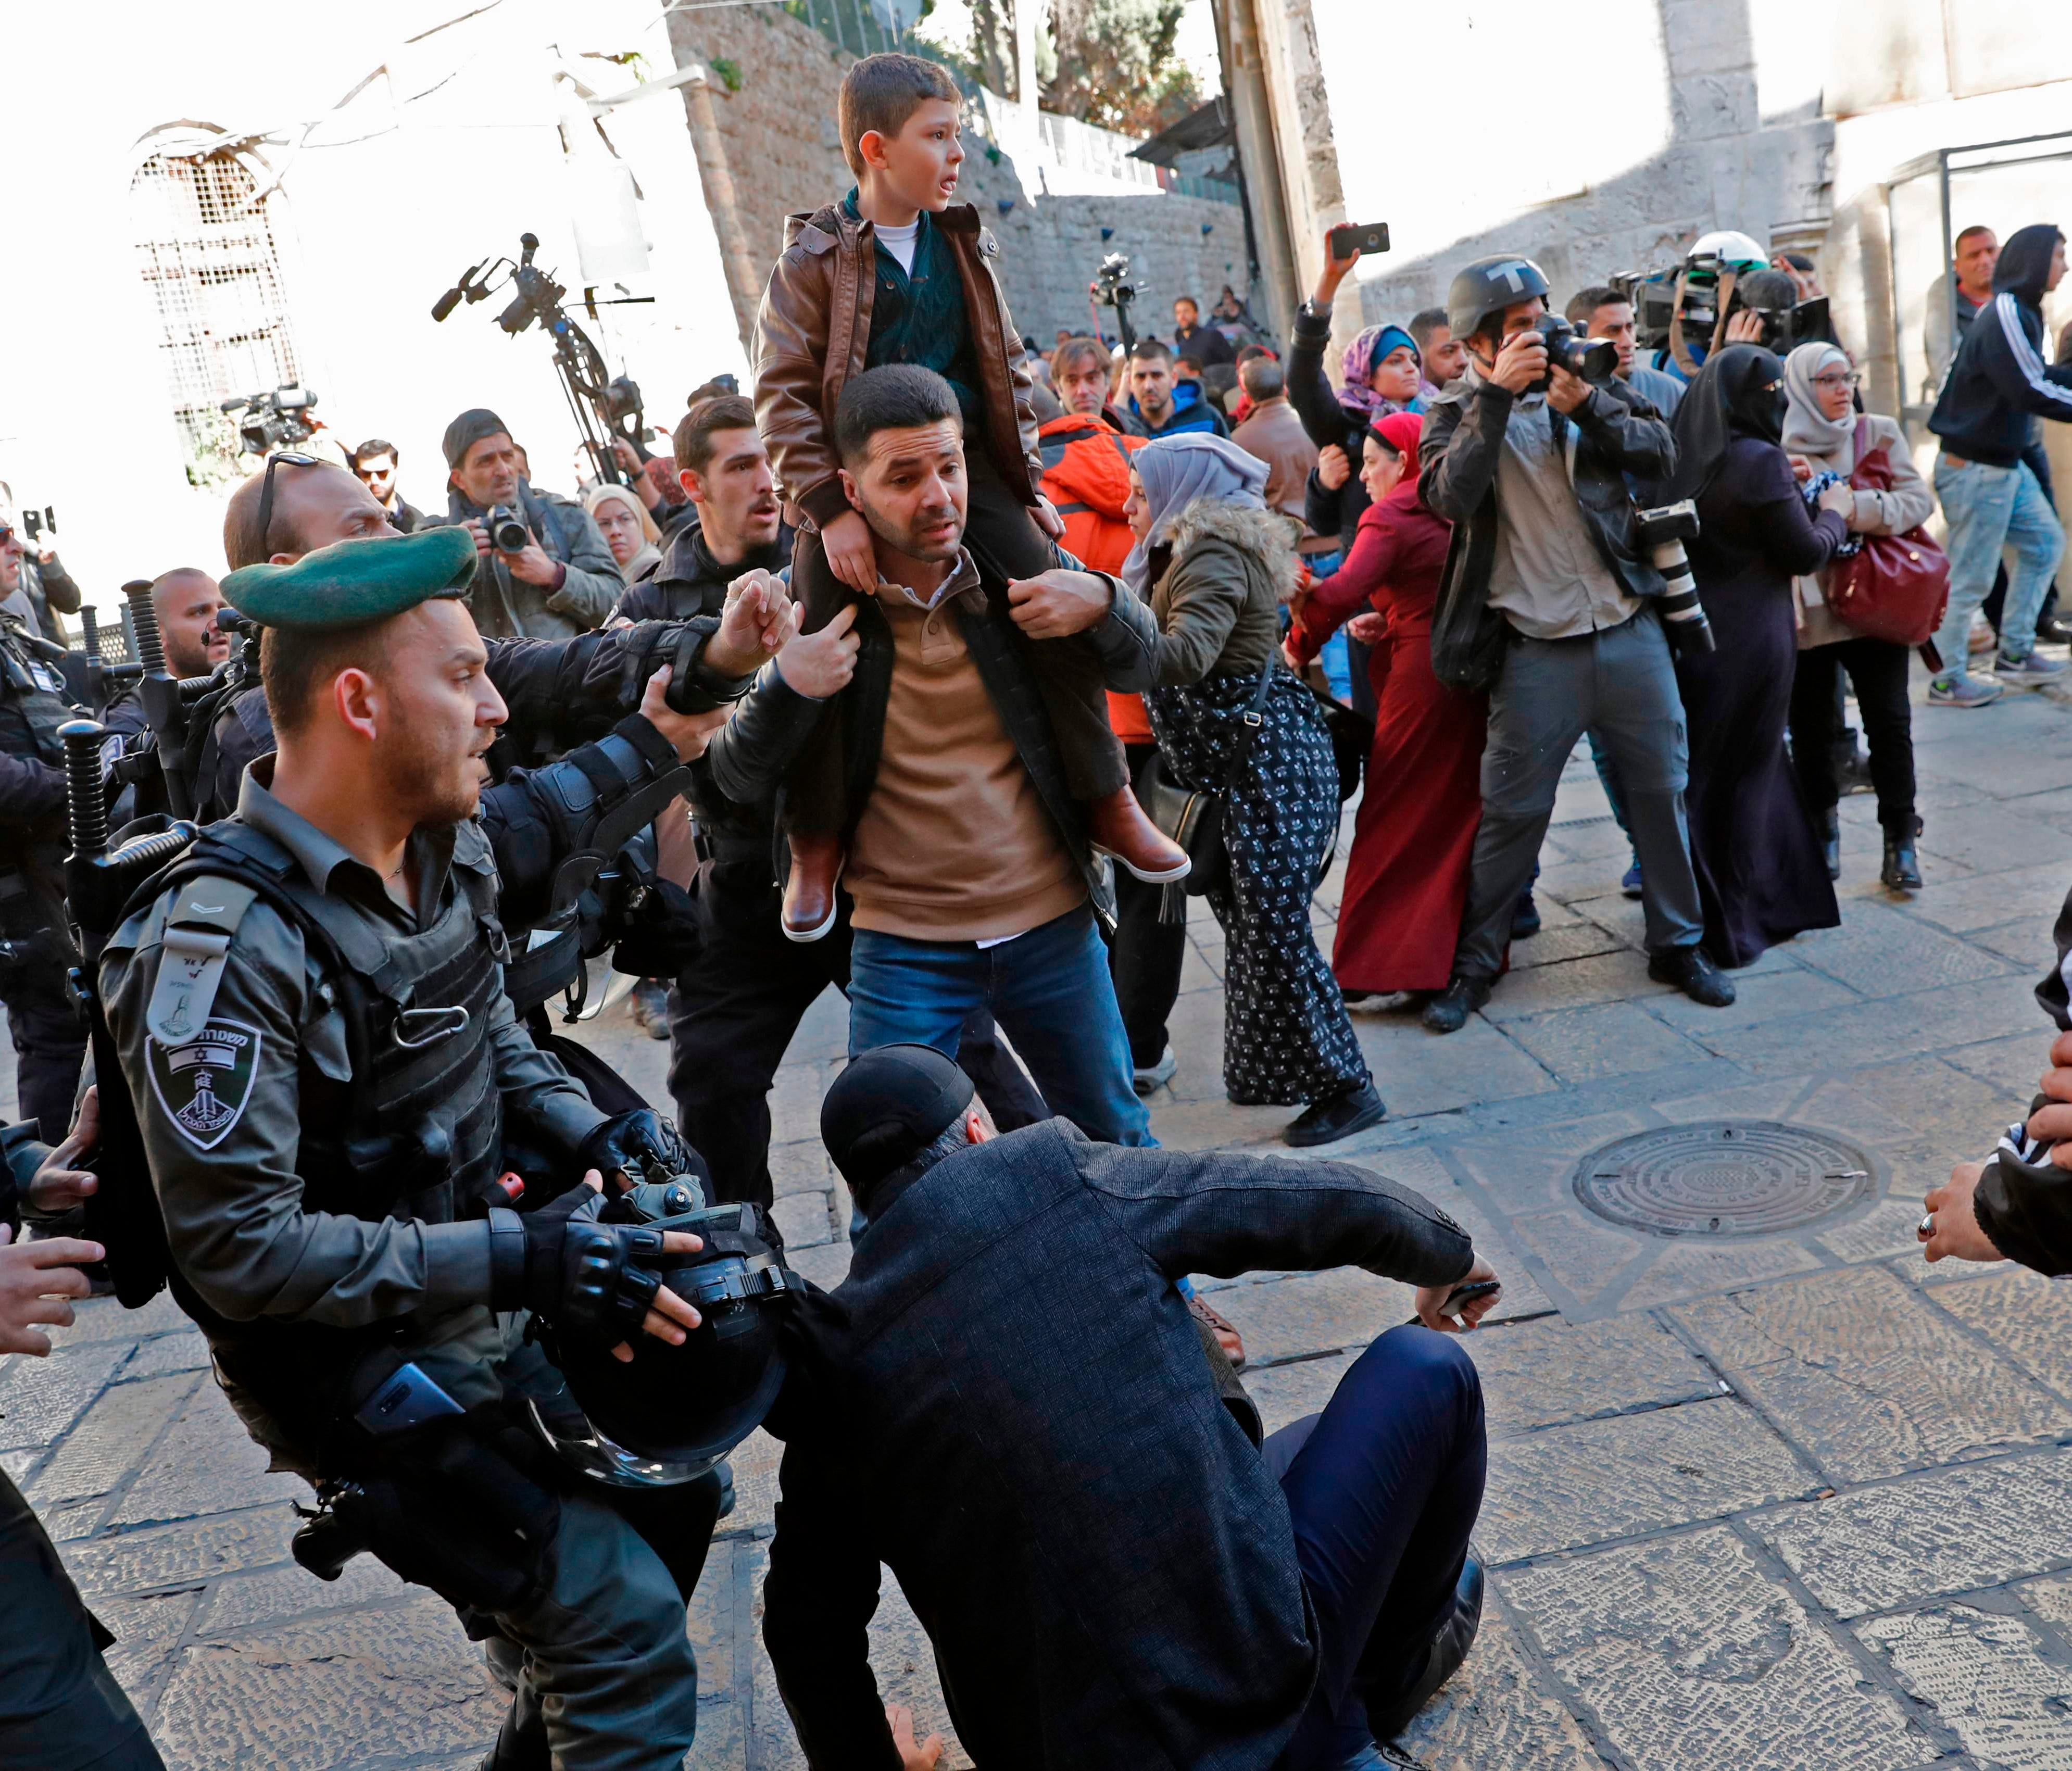 Israeli forces scuffle with people in Jerusalem's Old City on Dec. 8, 2017.